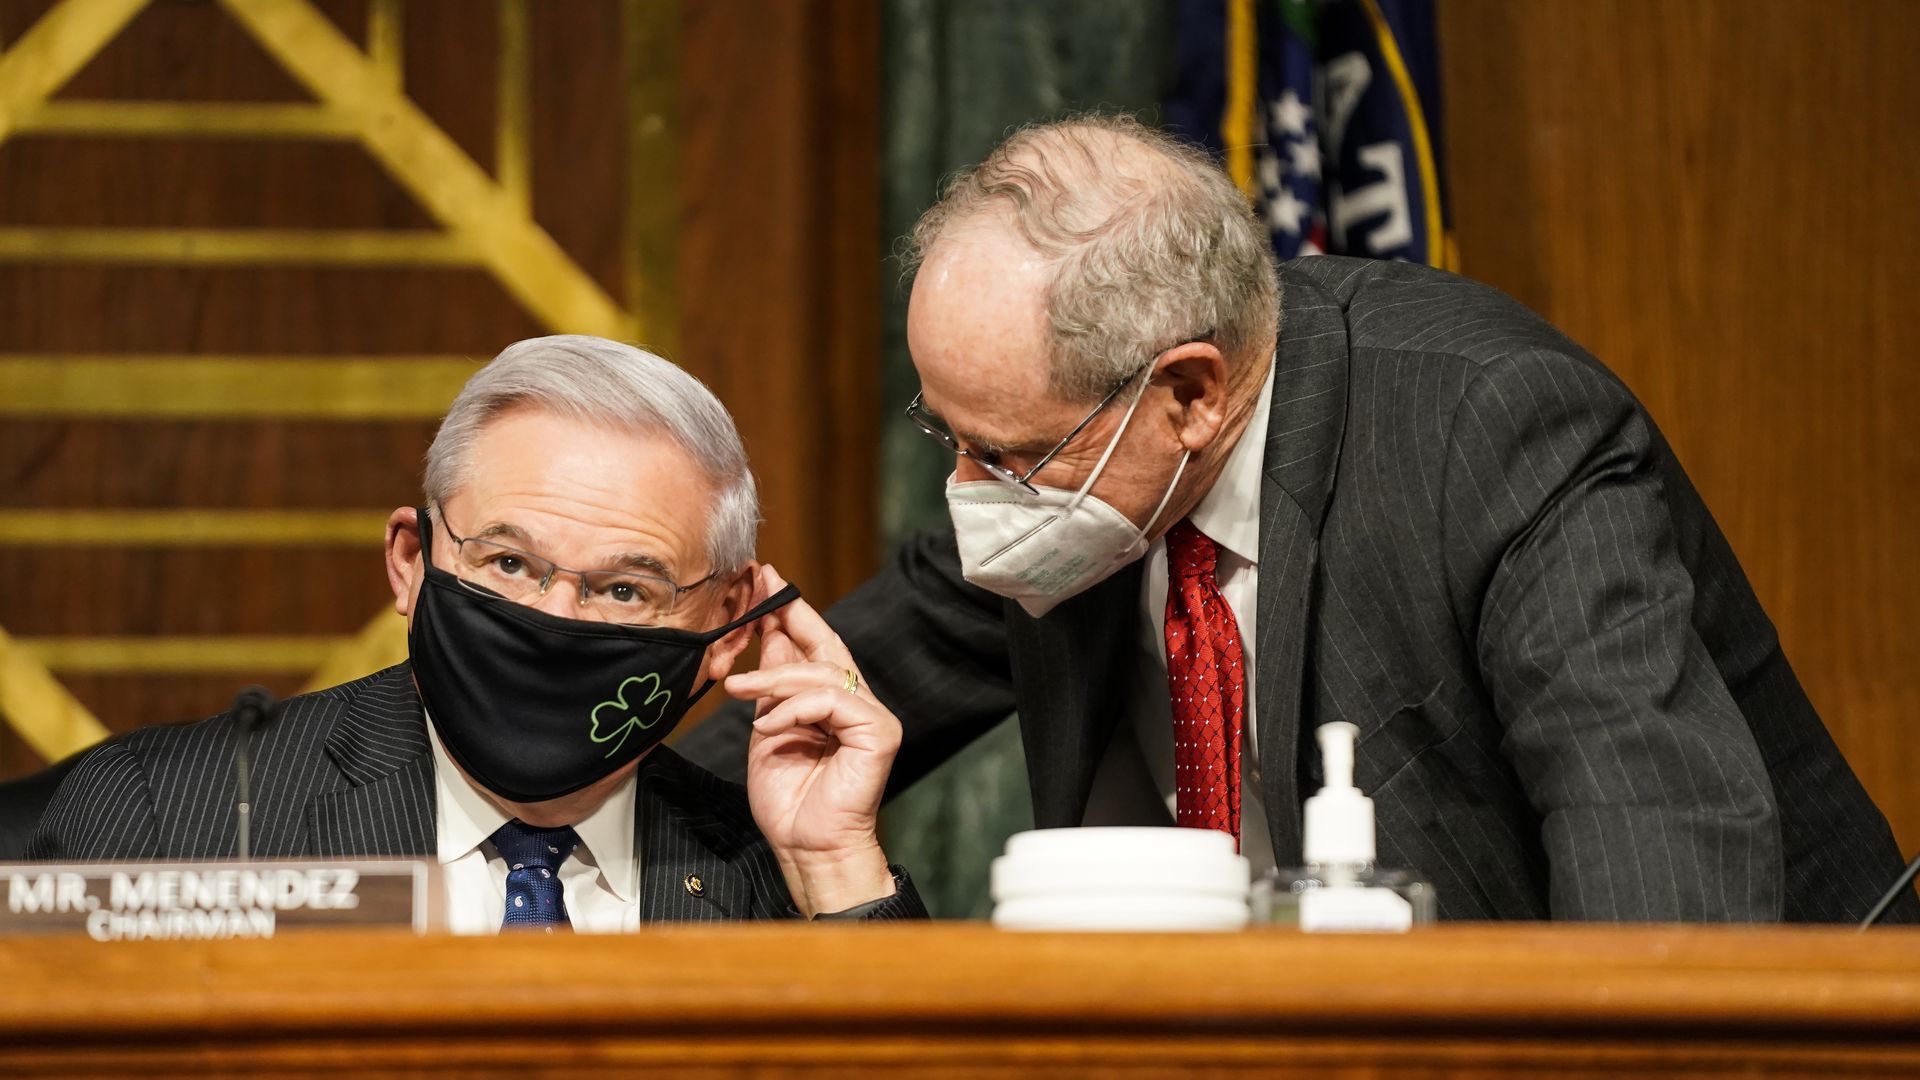 Two older white men wear face masks and speak to each other while wearing suits